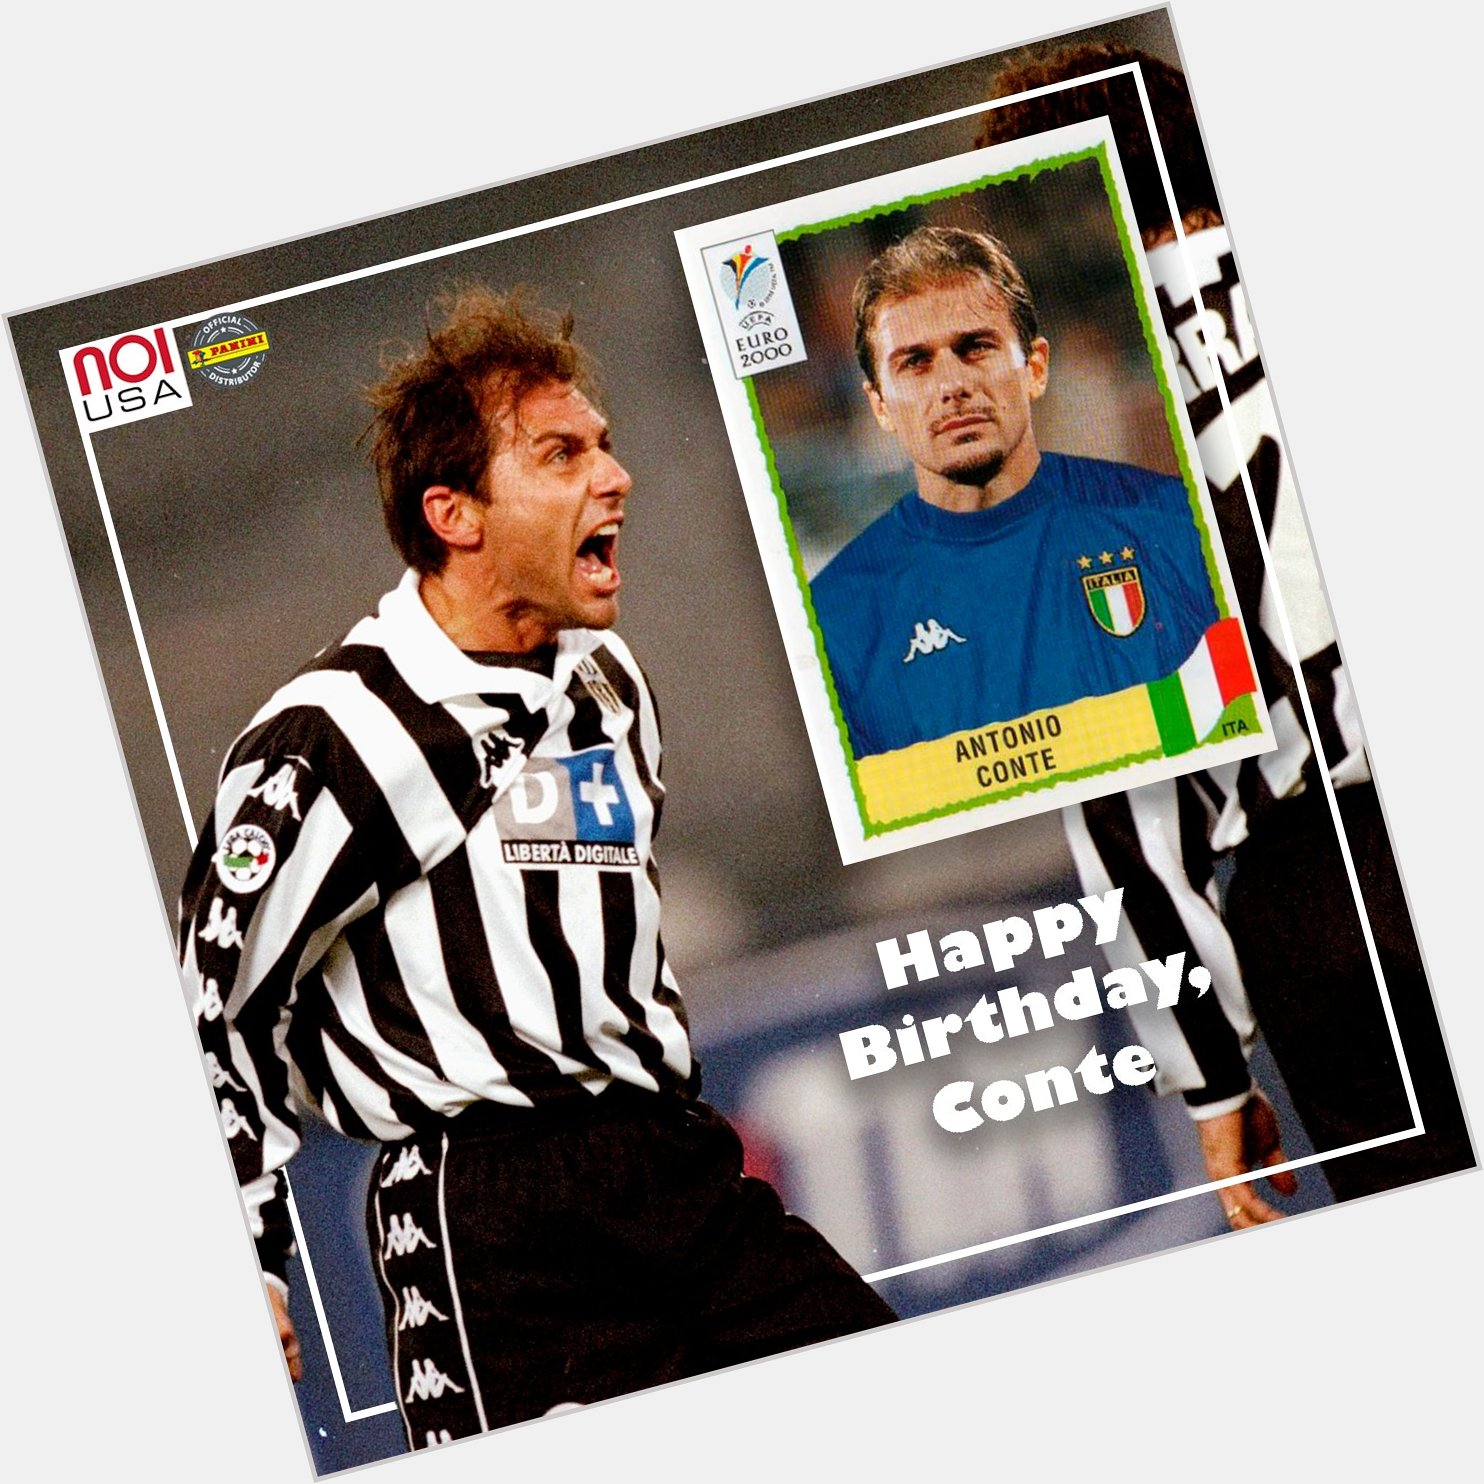 Happy birthday to Antonio Conte! What do you prefer: the Conte player or the Conte DT?? 